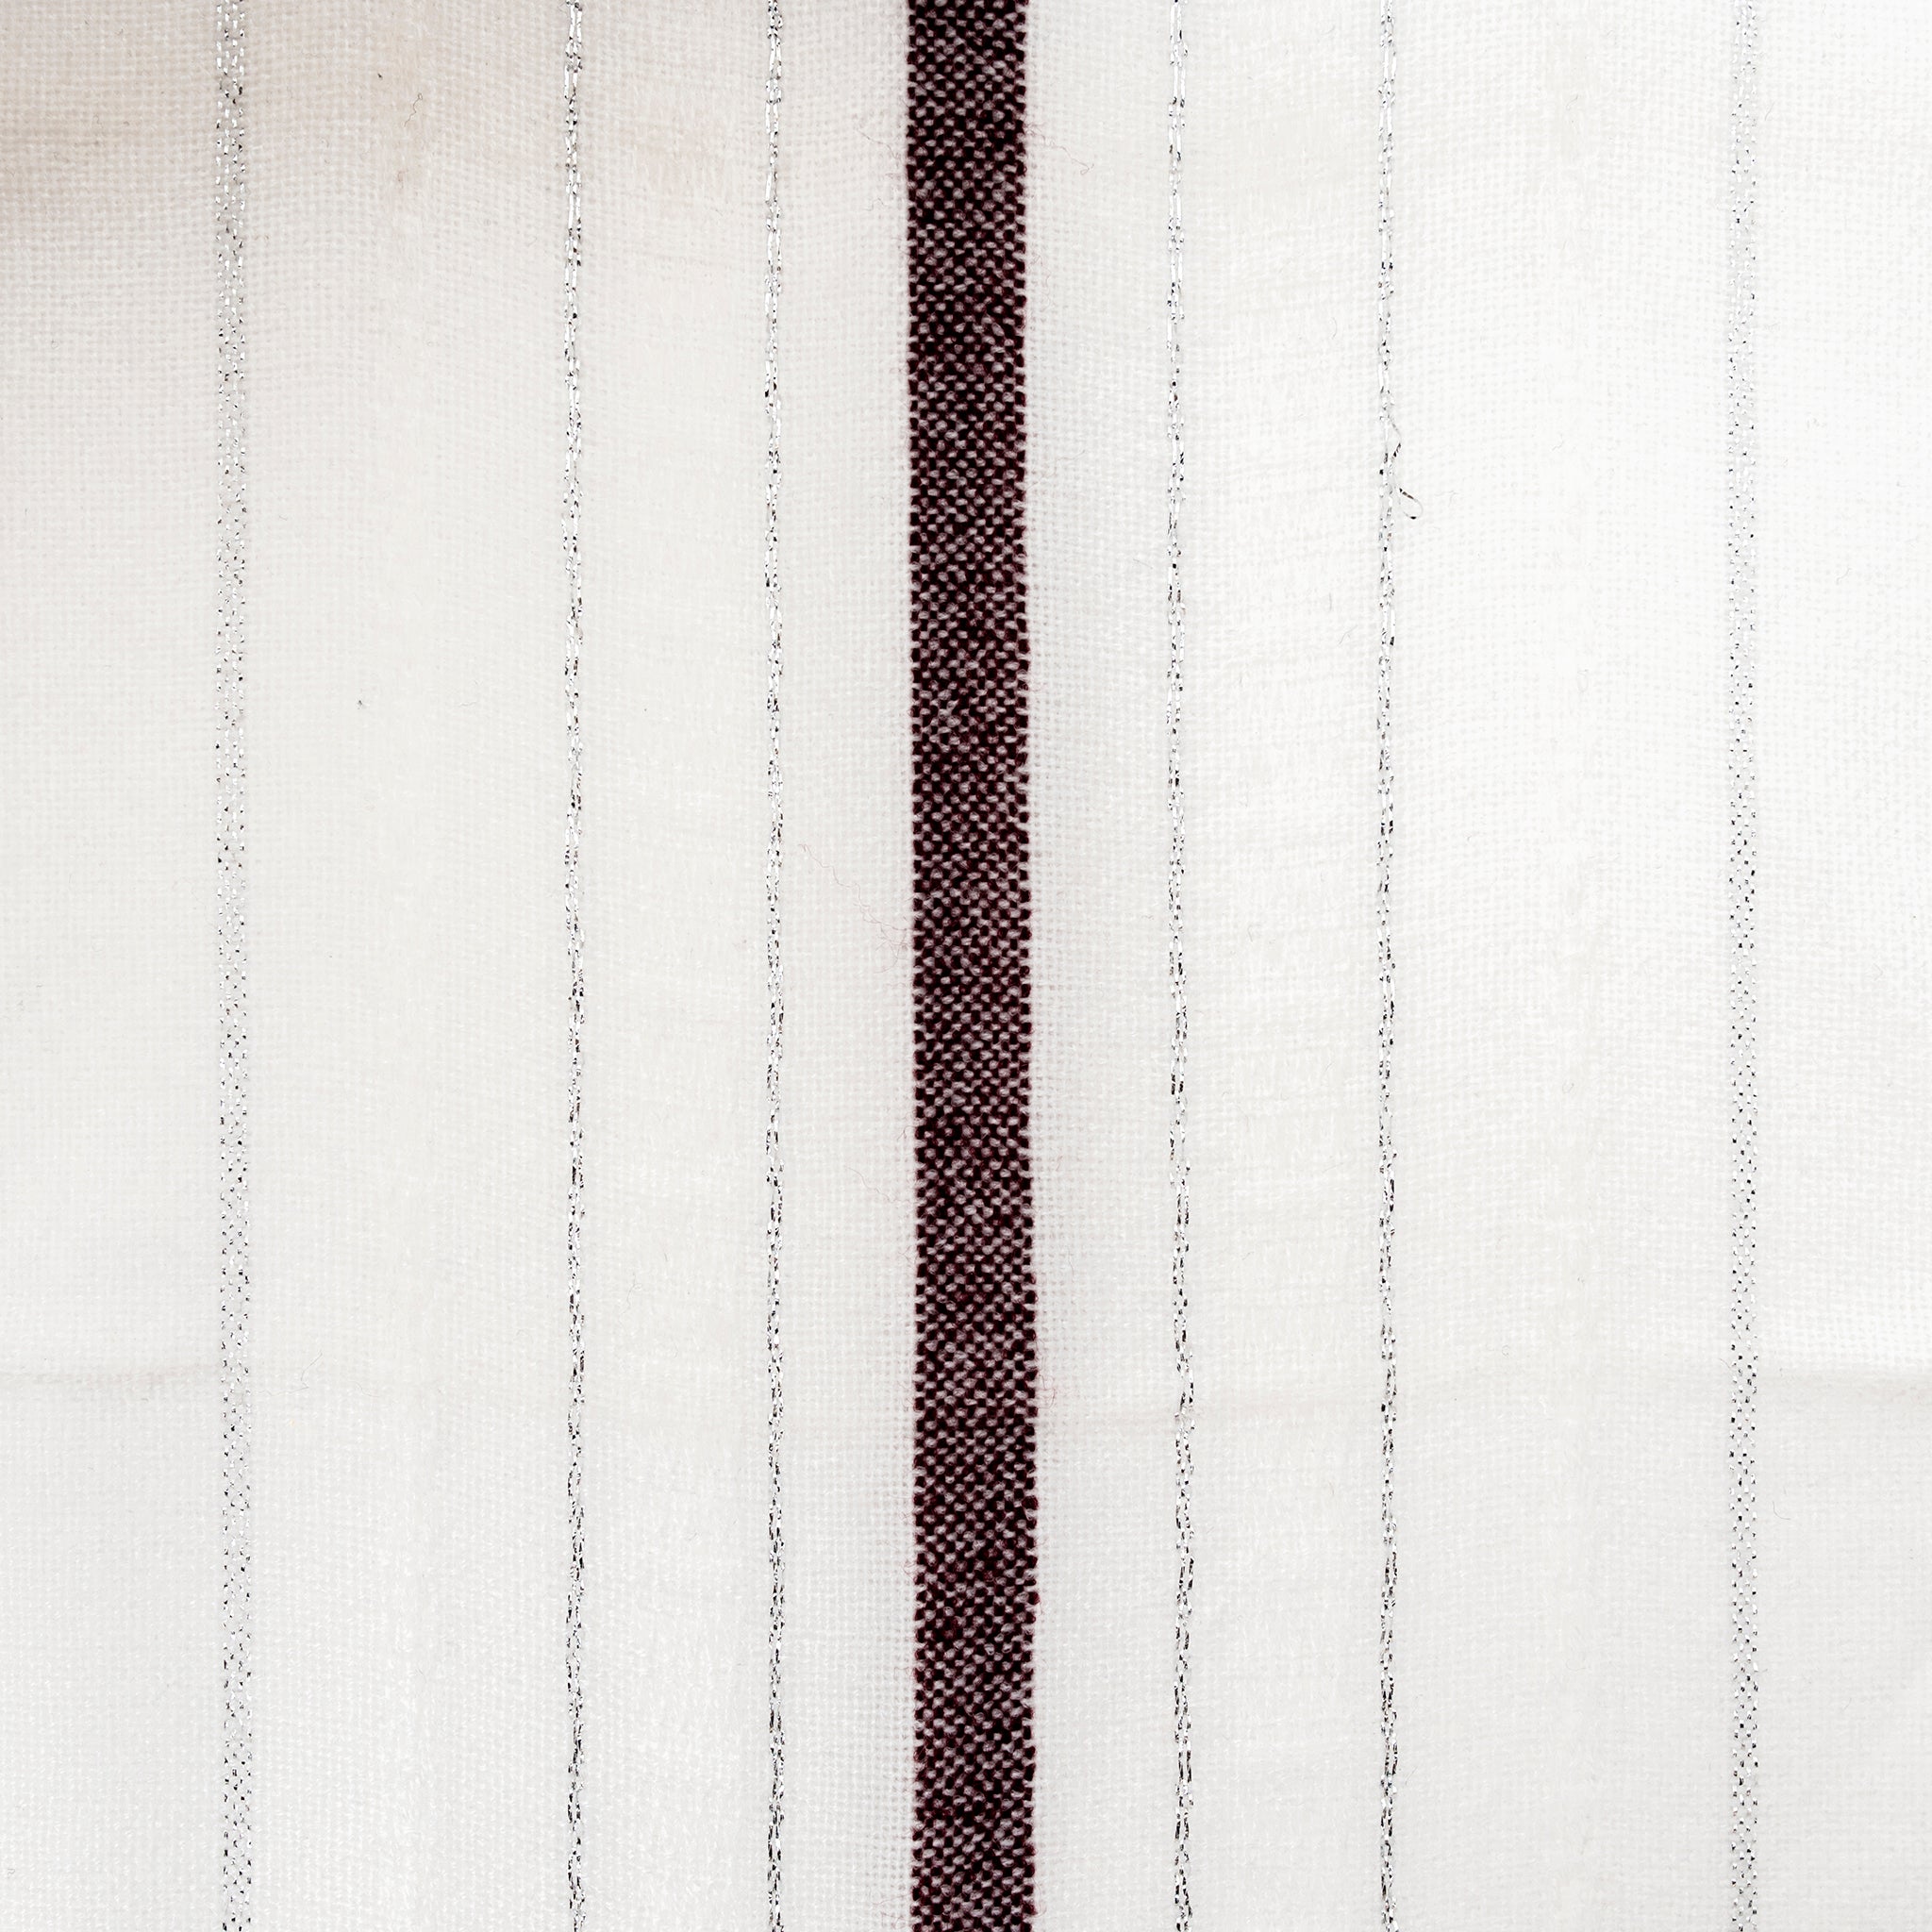 Tablecloths - Minimal Design - Bordeaux and Silver on White